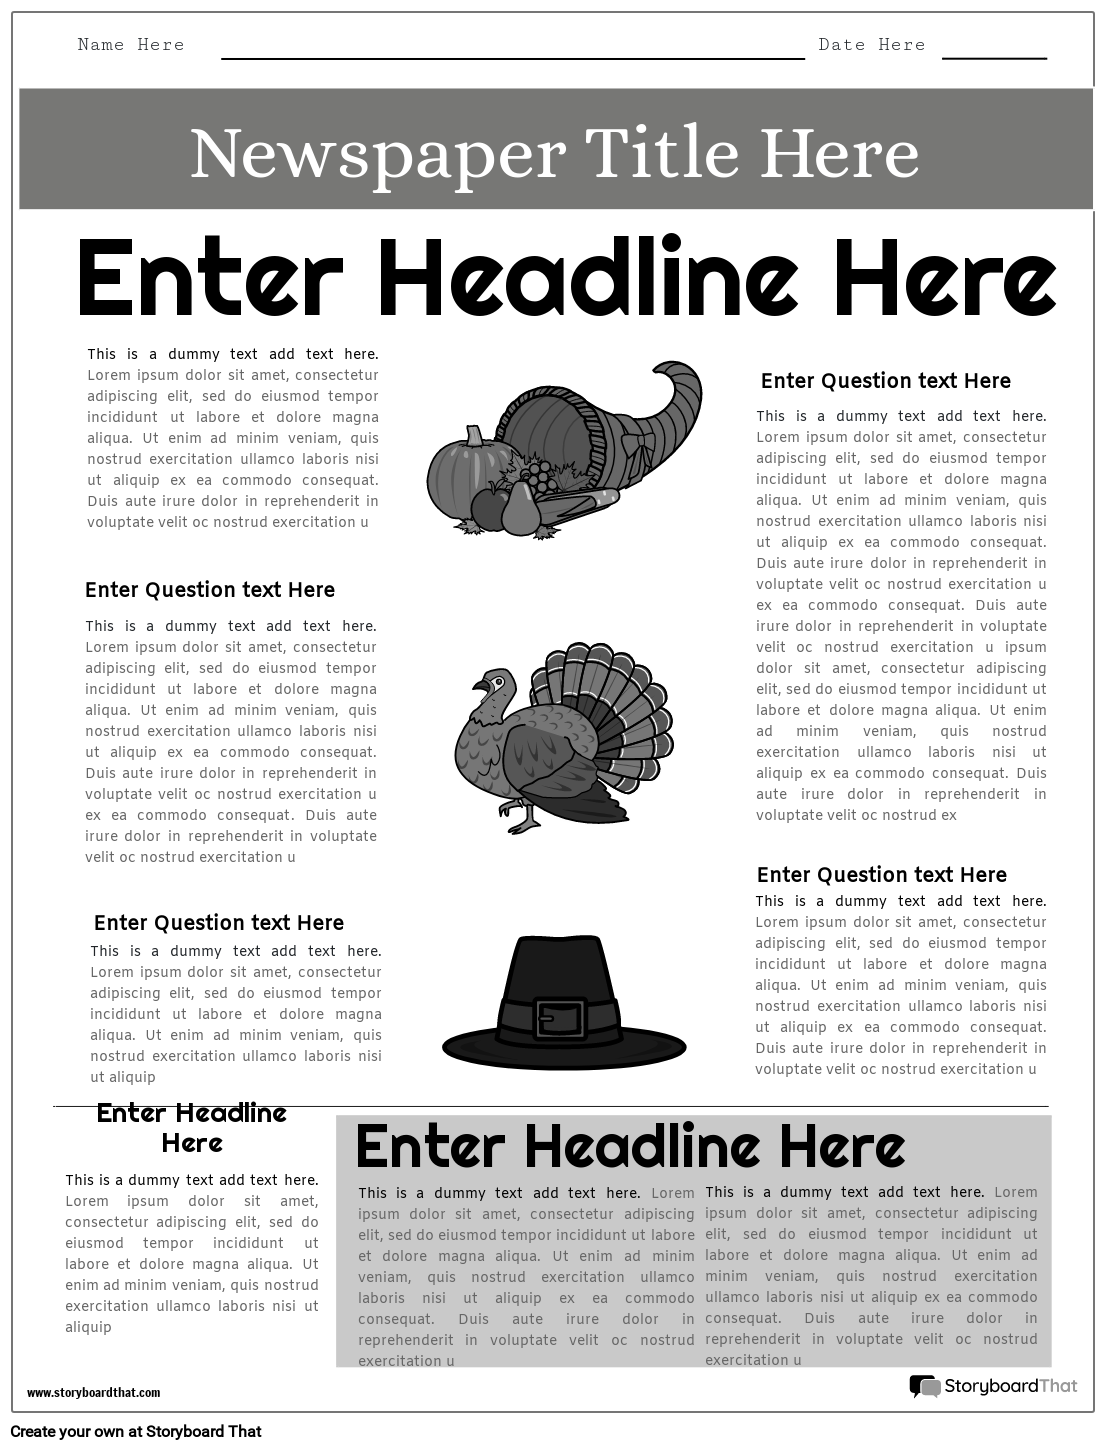 Newspaper interview article Template Grey Storyboard